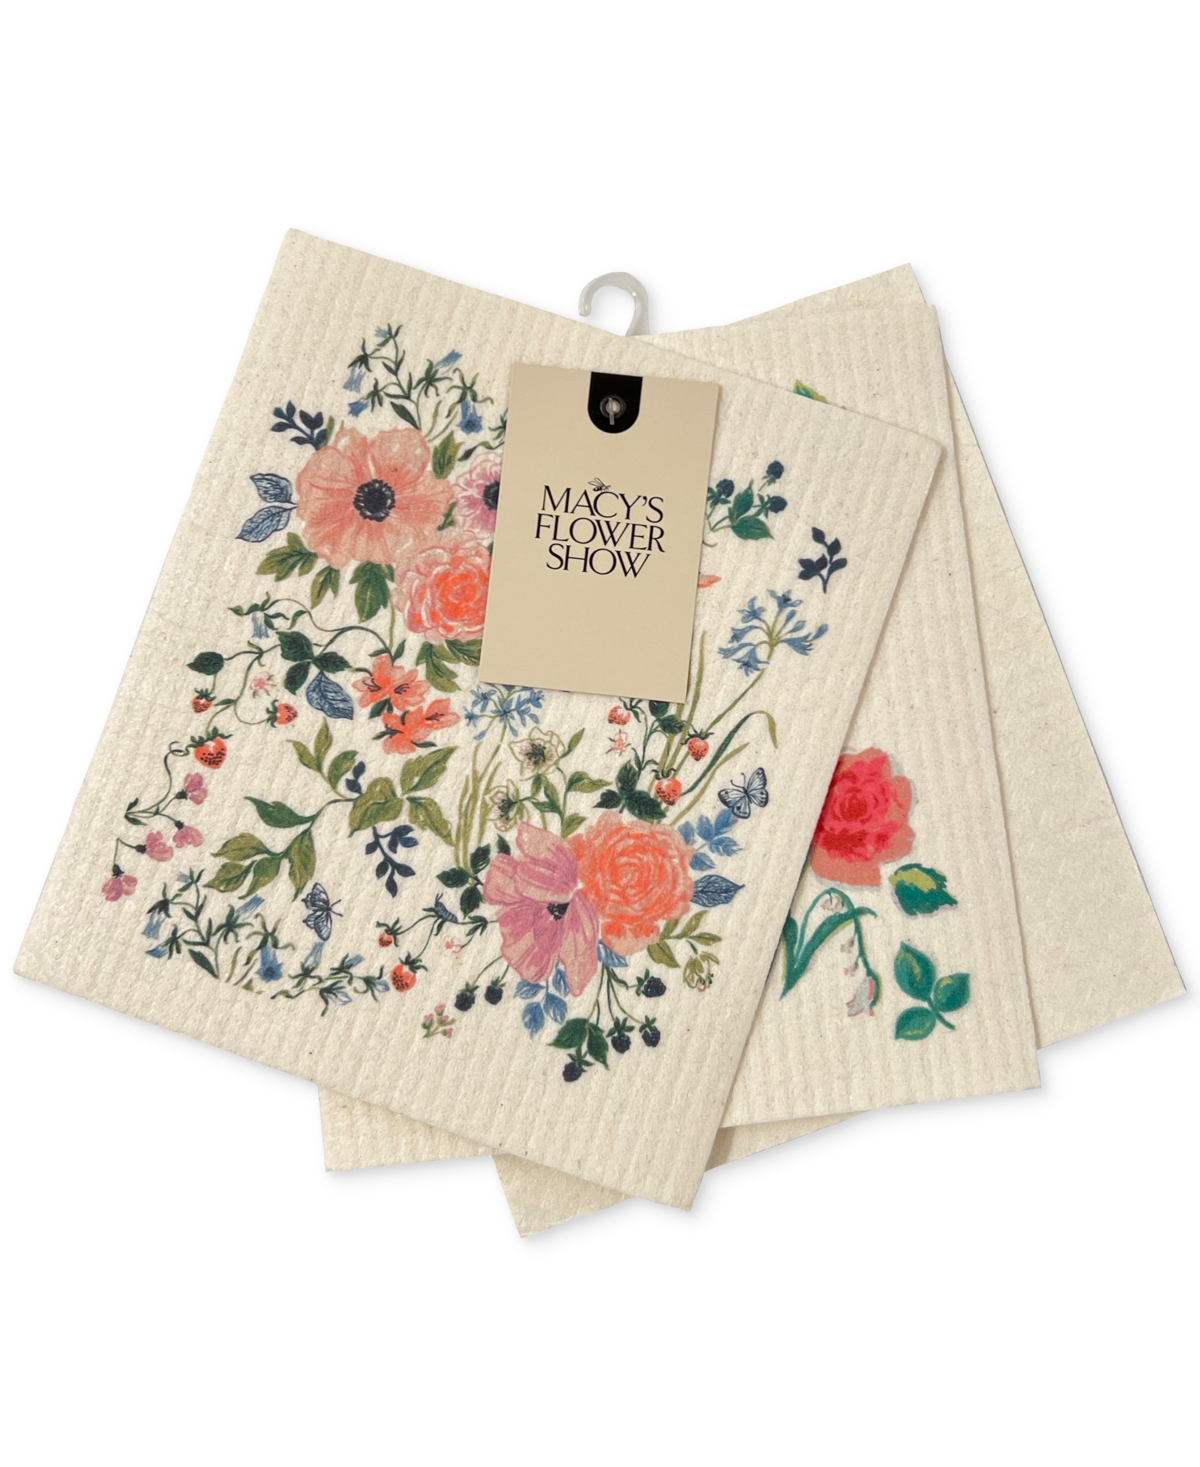 Flower Show Swedish Dishcloth Set of 3, Created for Macy's - Floral Multi